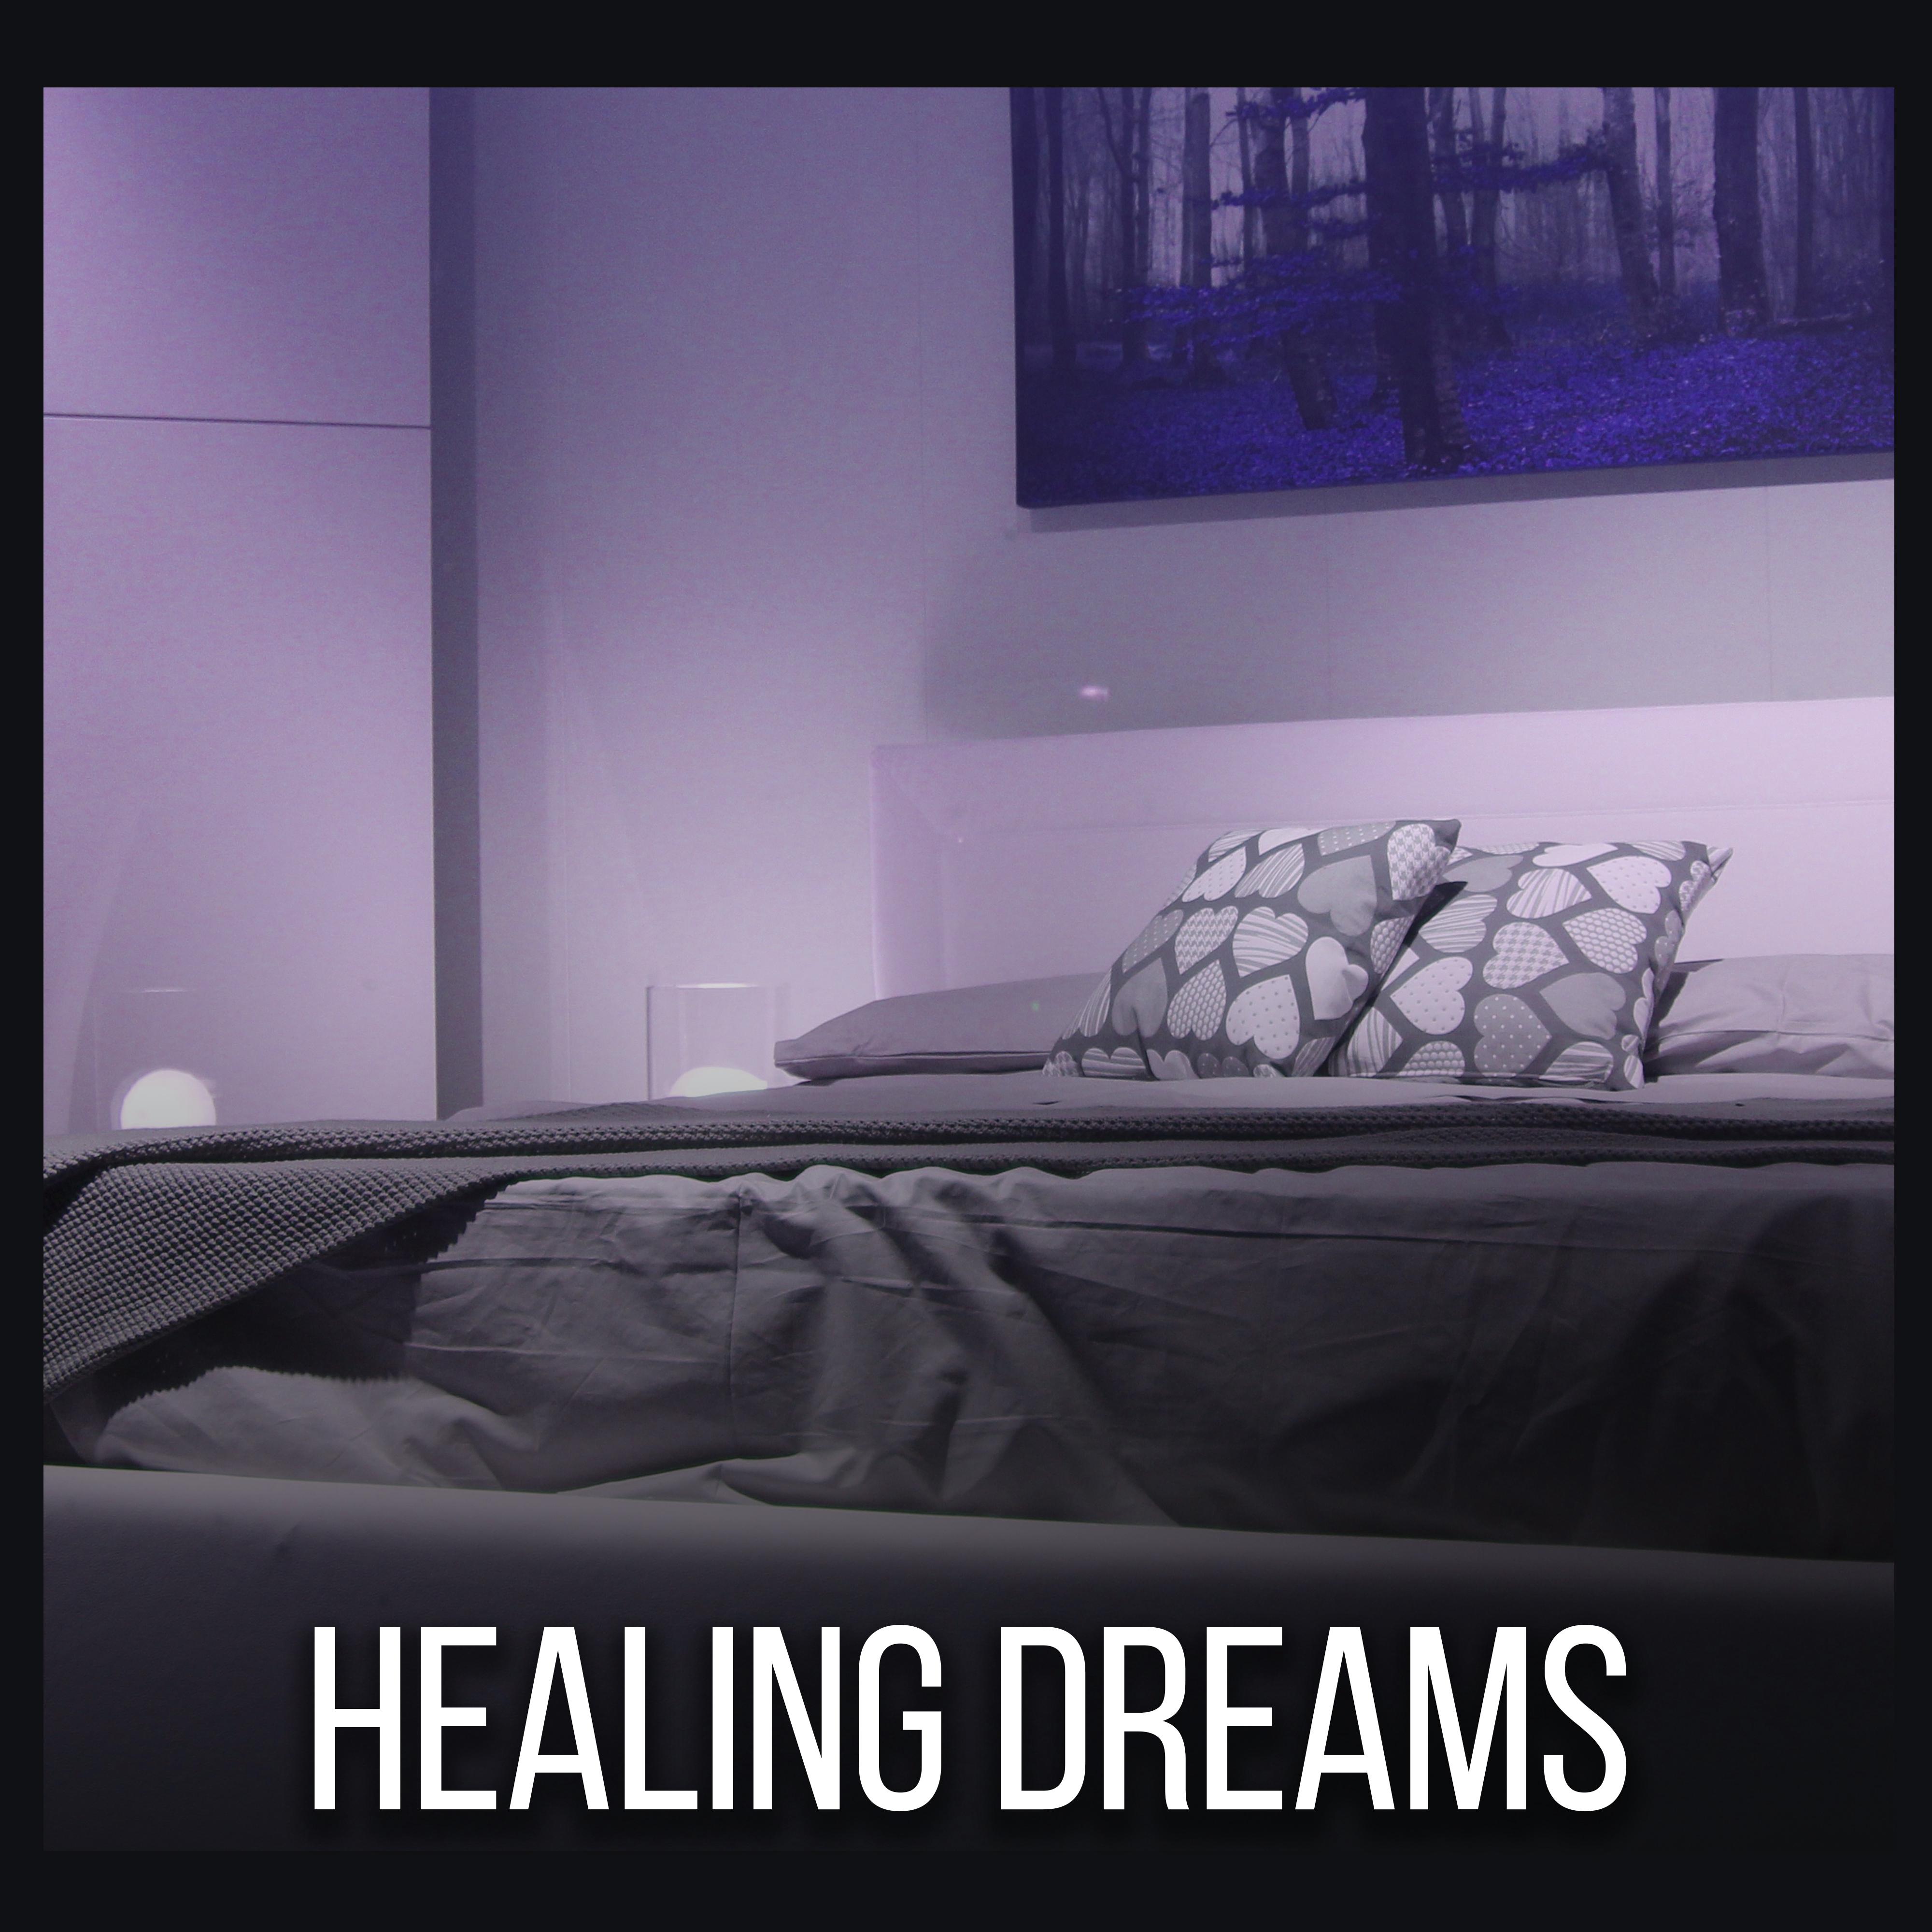 Healing Dreams  Pure Relaxation, Peaceful Mind, Soft Music for Sleep, Quiet Lullaby, Restful Sleep, Delicate Sounds at Goodnight